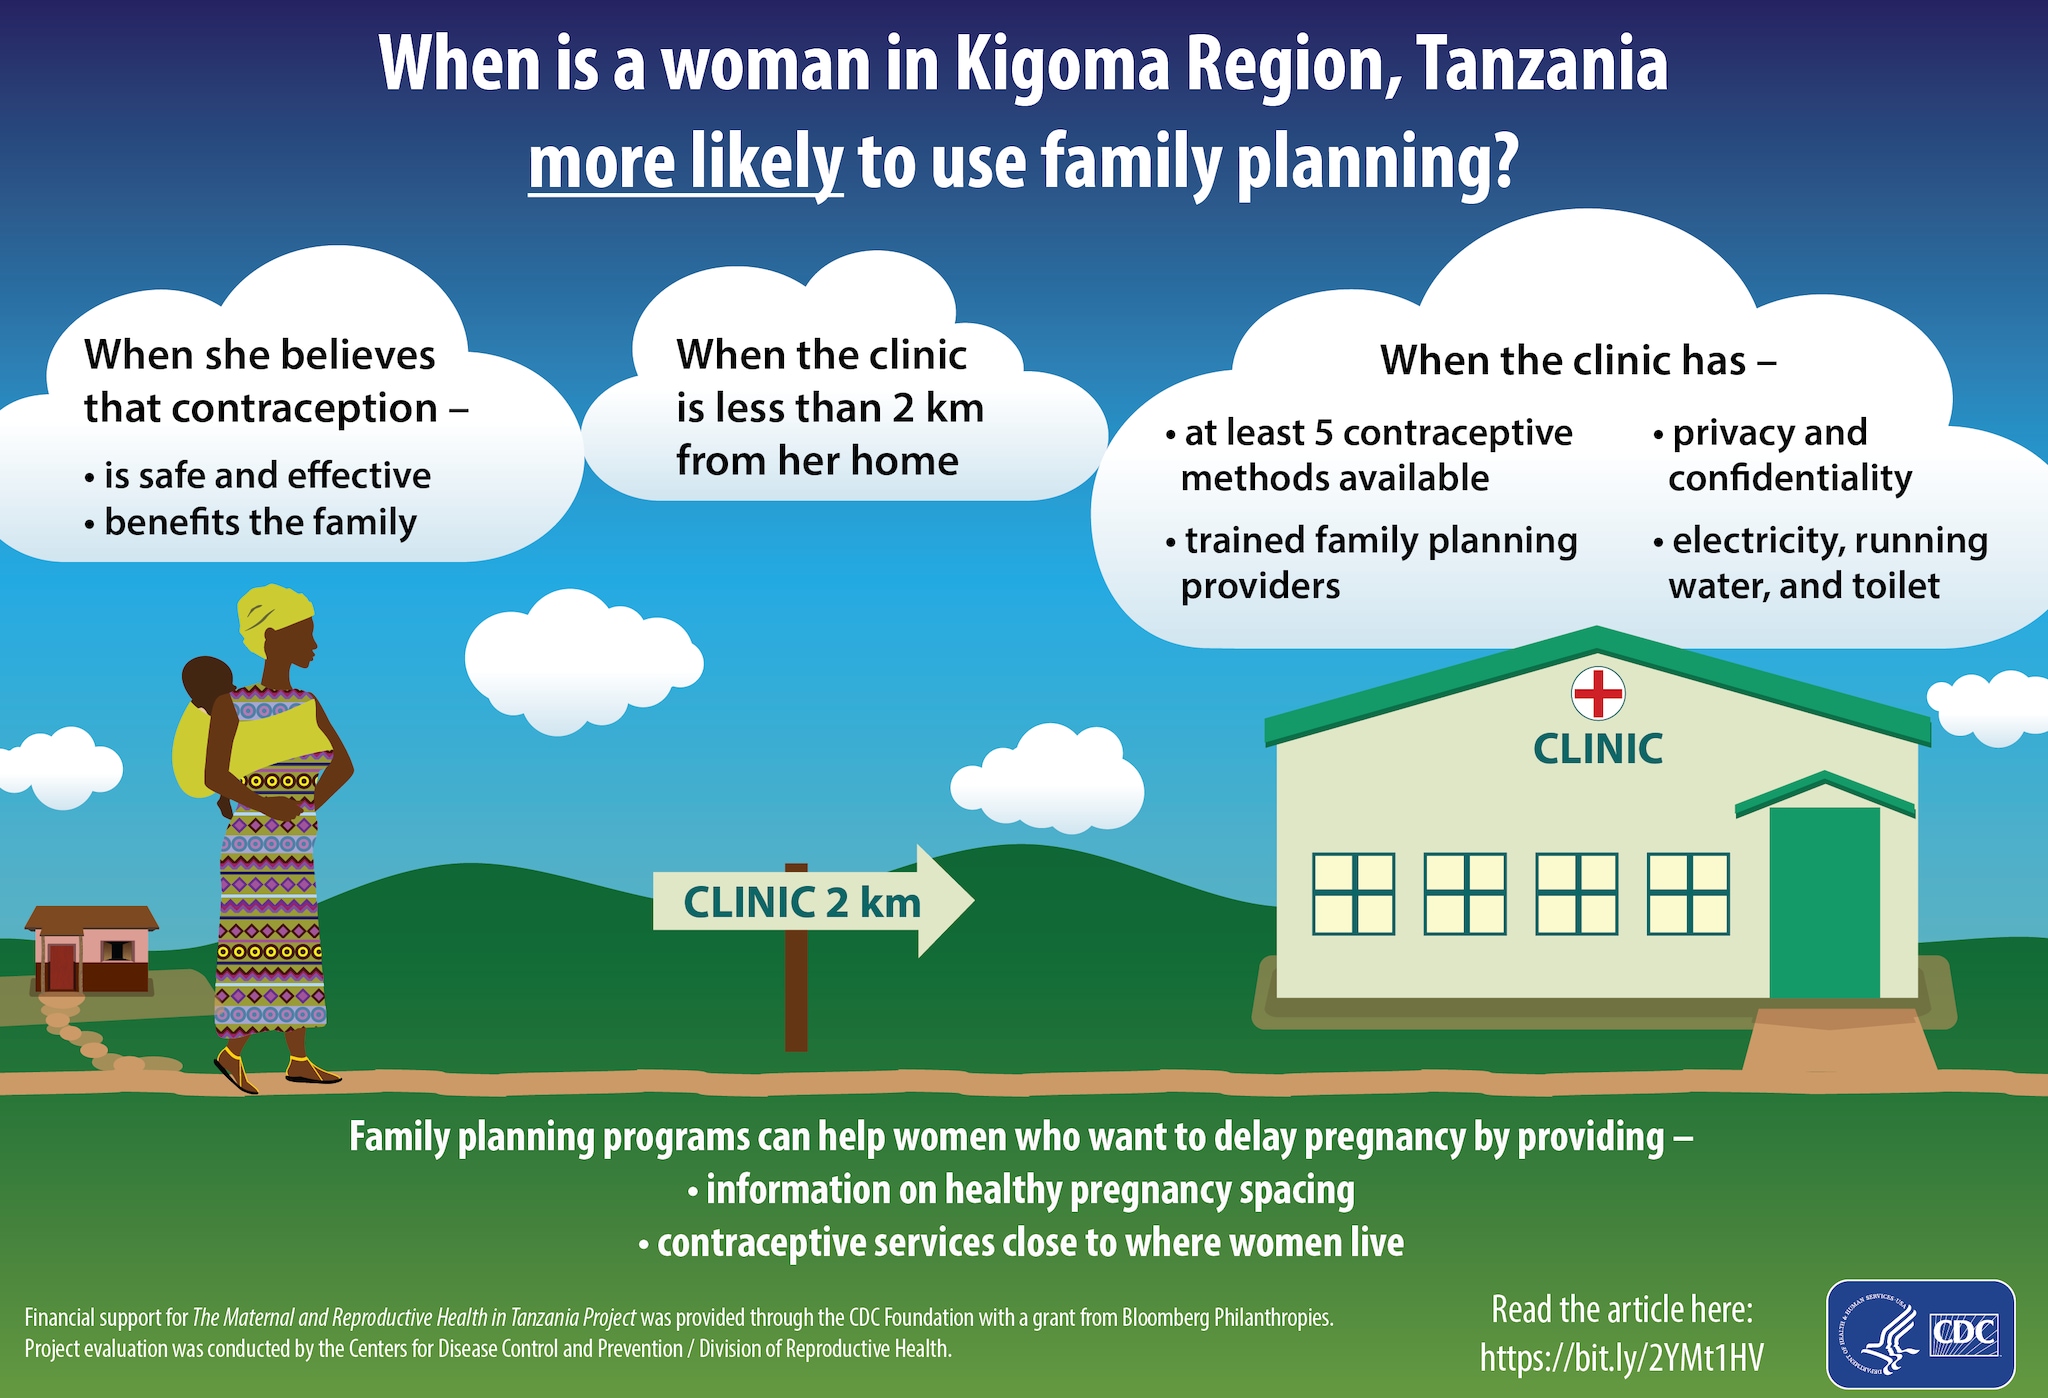 Family planning programs can help women who want to delay pregnancy by providing information.